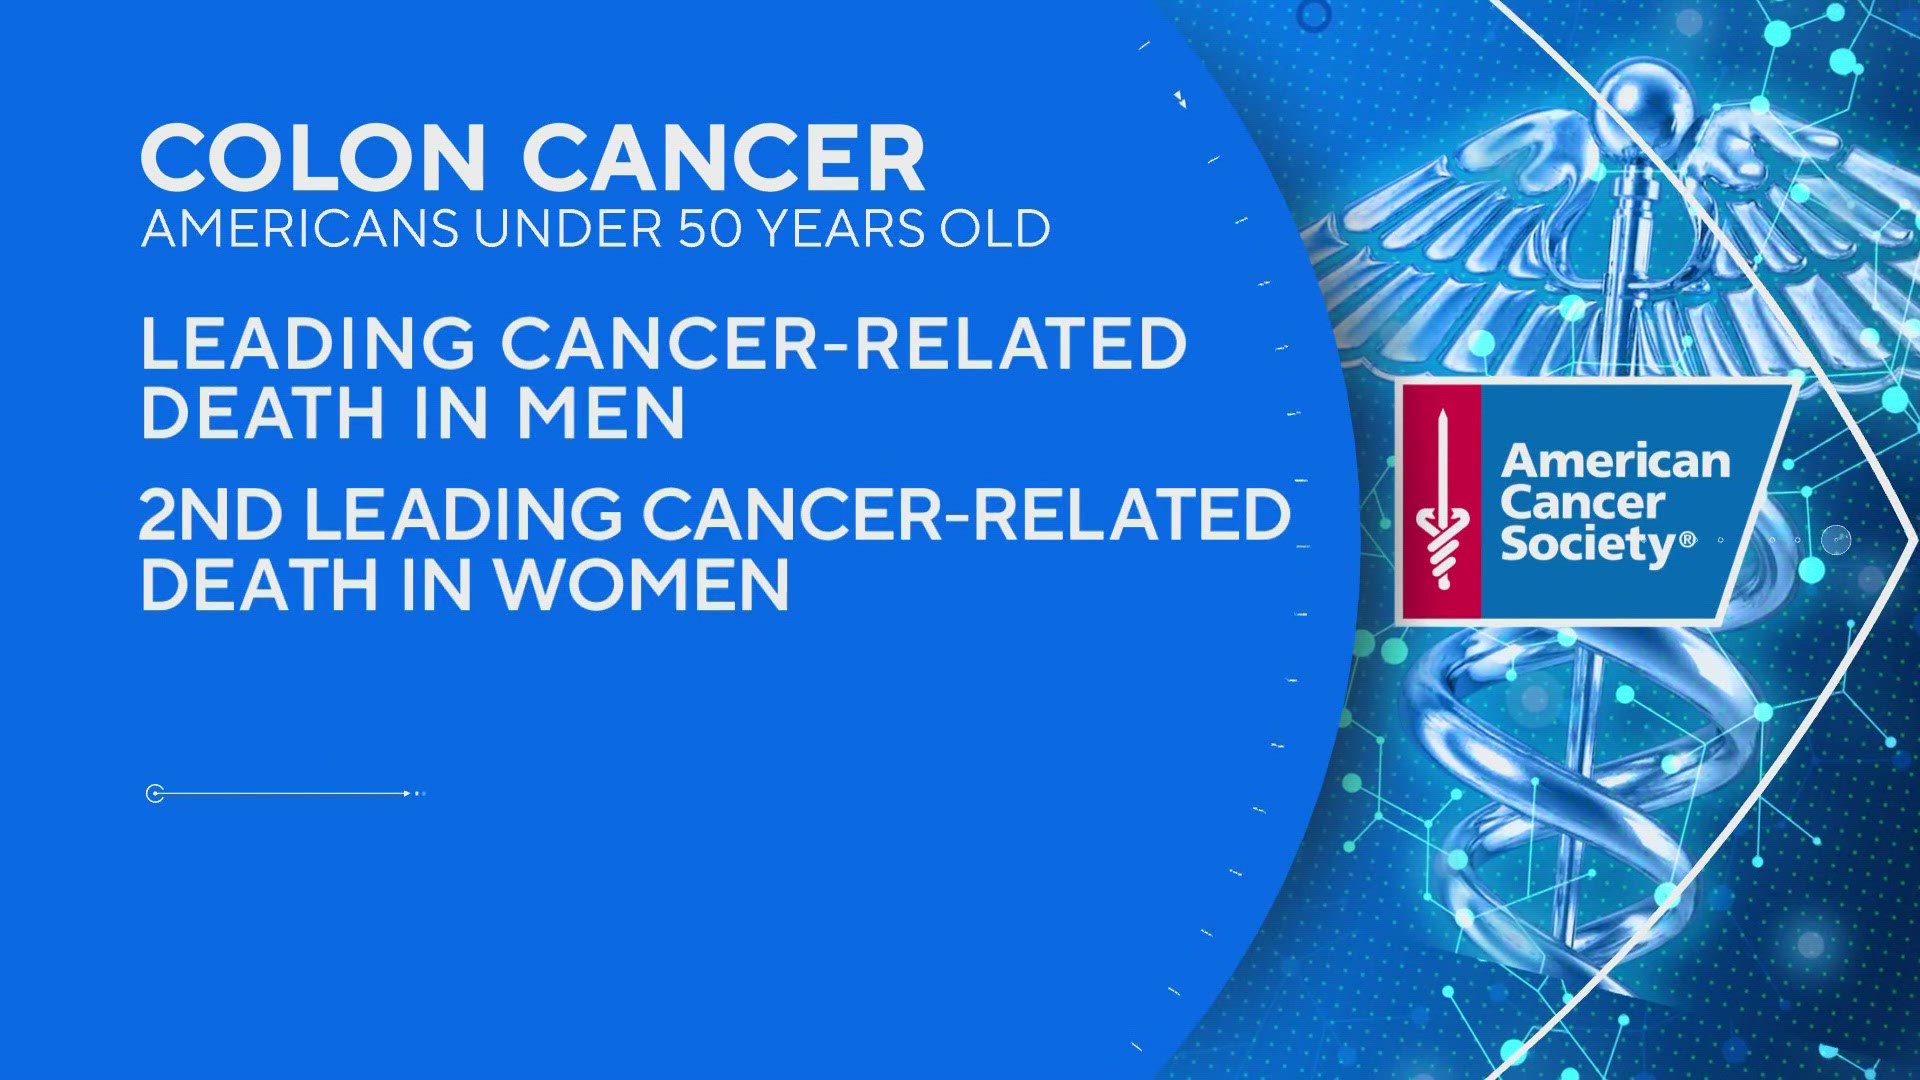 According to a new report from the American Cancer Society, Colorectal cancer is now the leading cause of cancer death in men under 50.